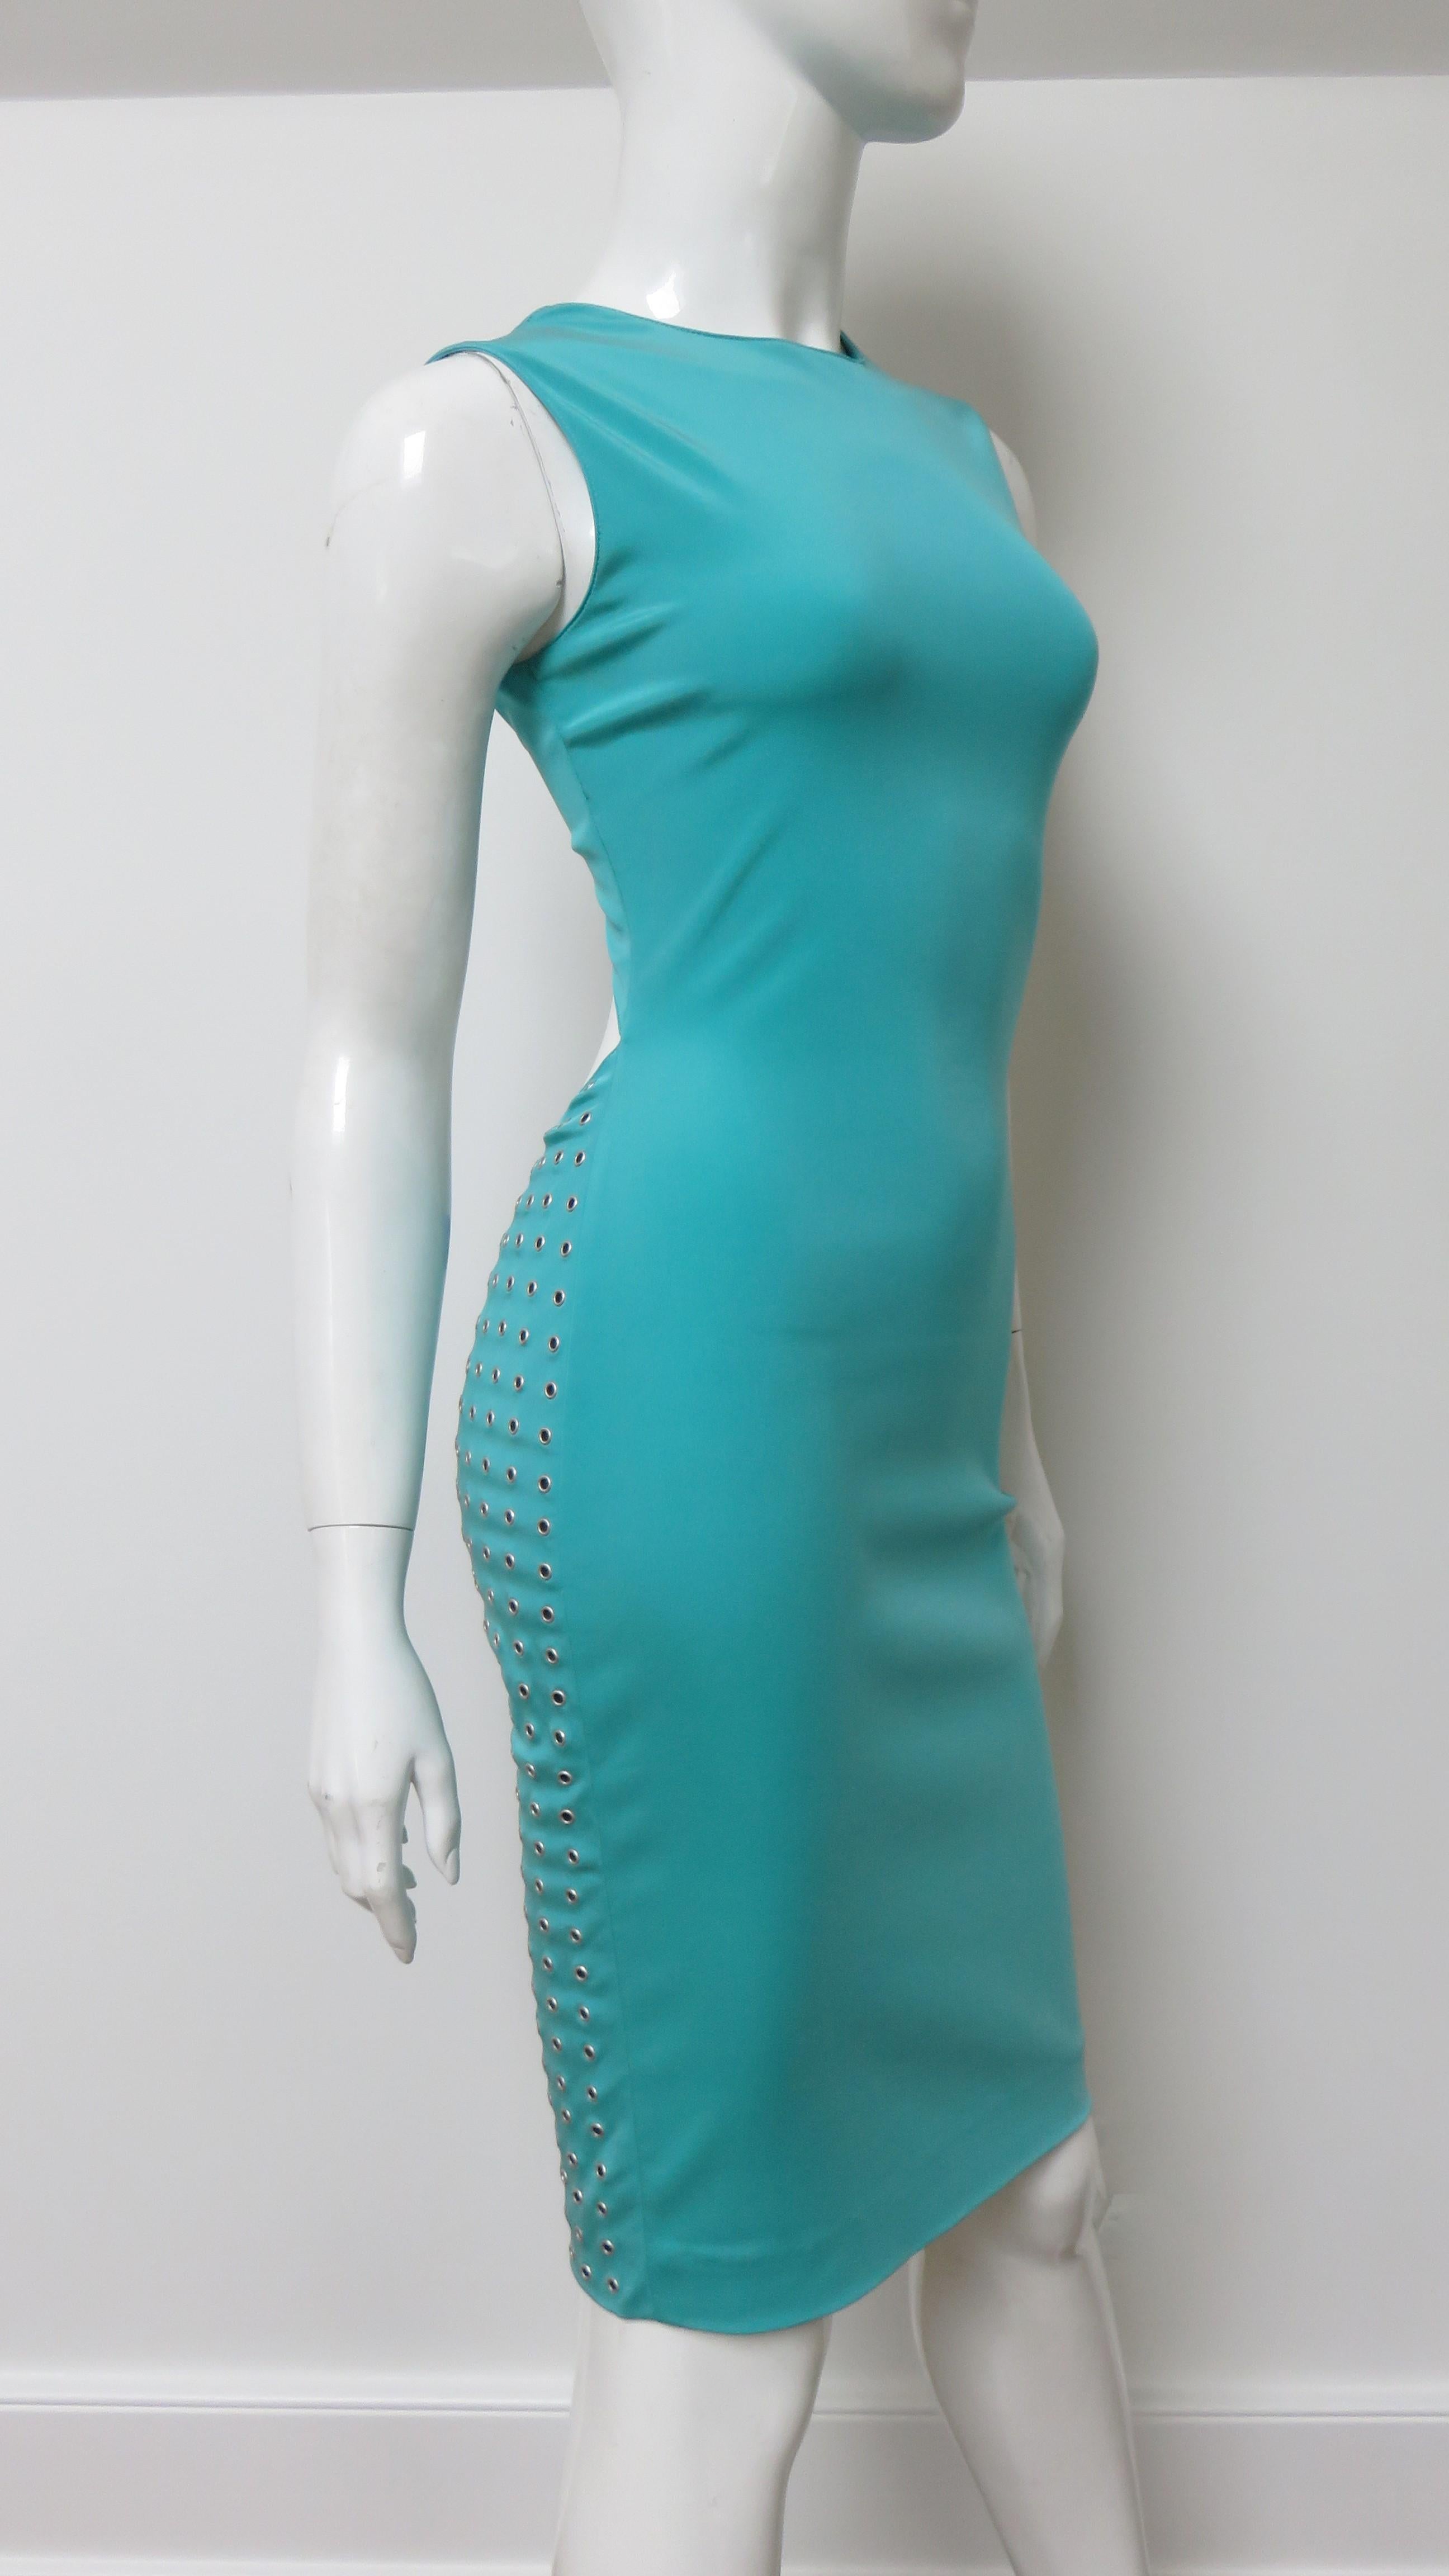 Gianni Versace Cut out Back Silk Dress with Grommets S/S 2003 For Sale 3